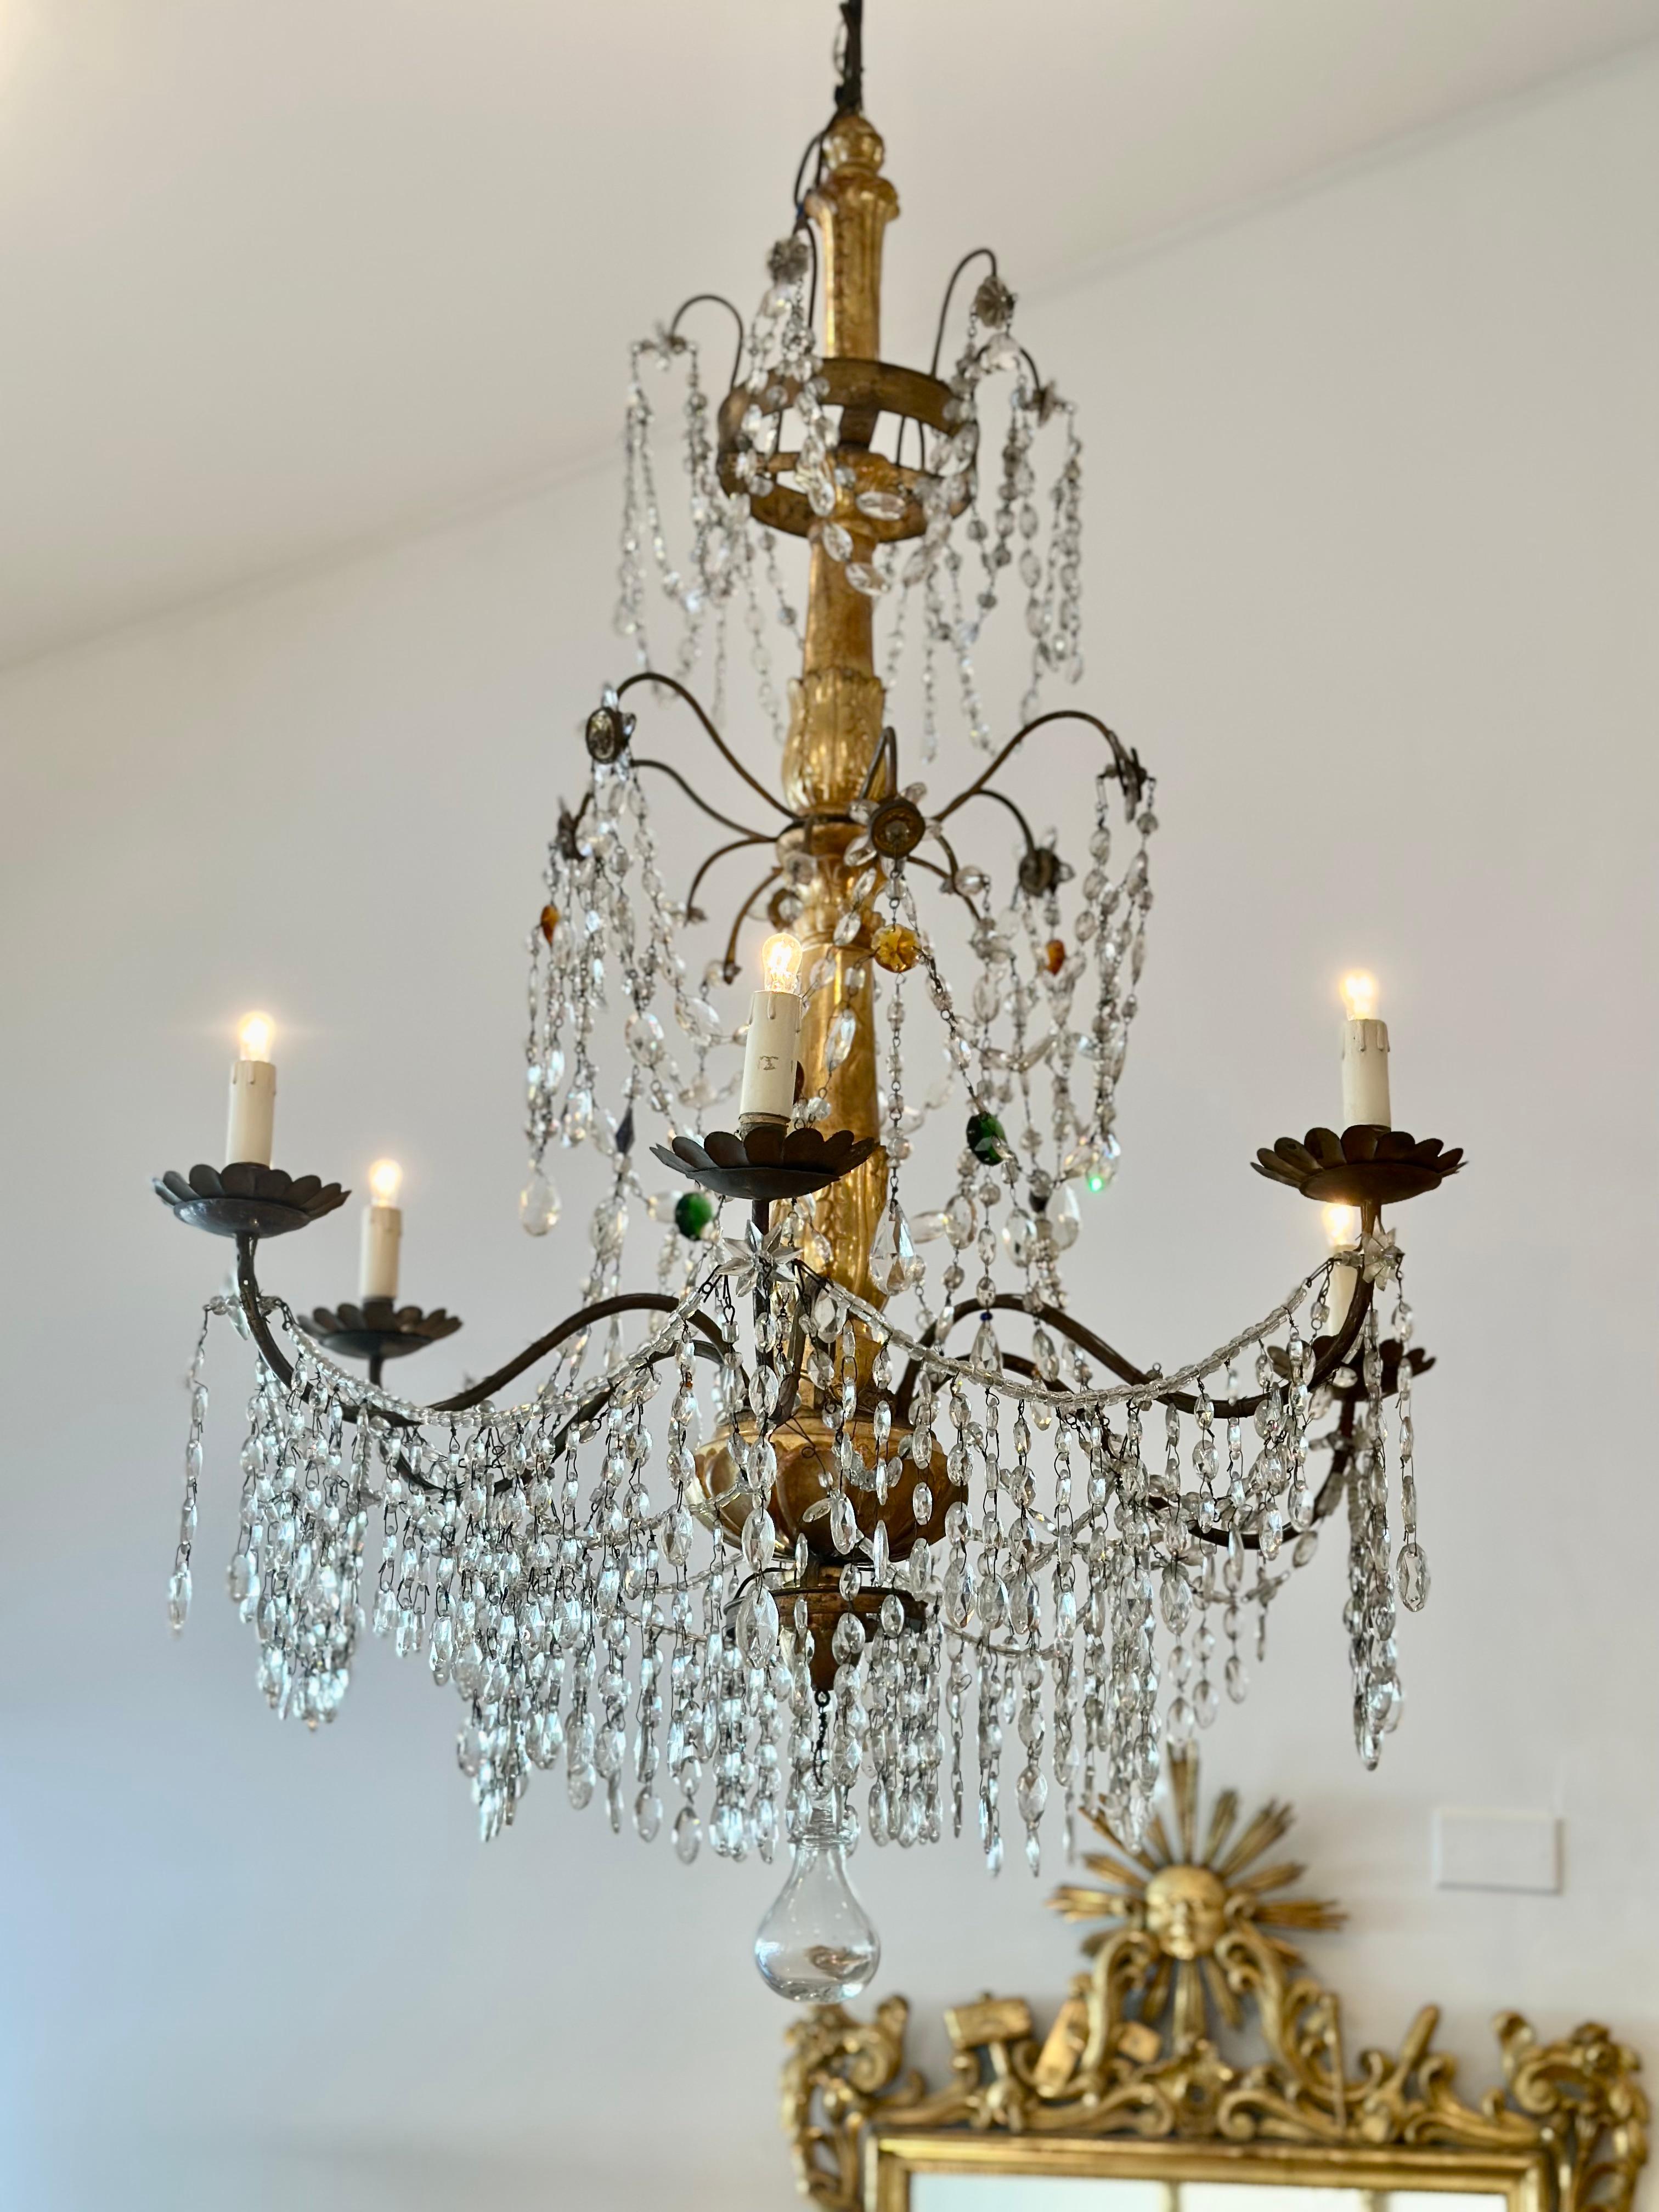 Italian  Important Late 18th c  Genovese Chandelier  For Sale